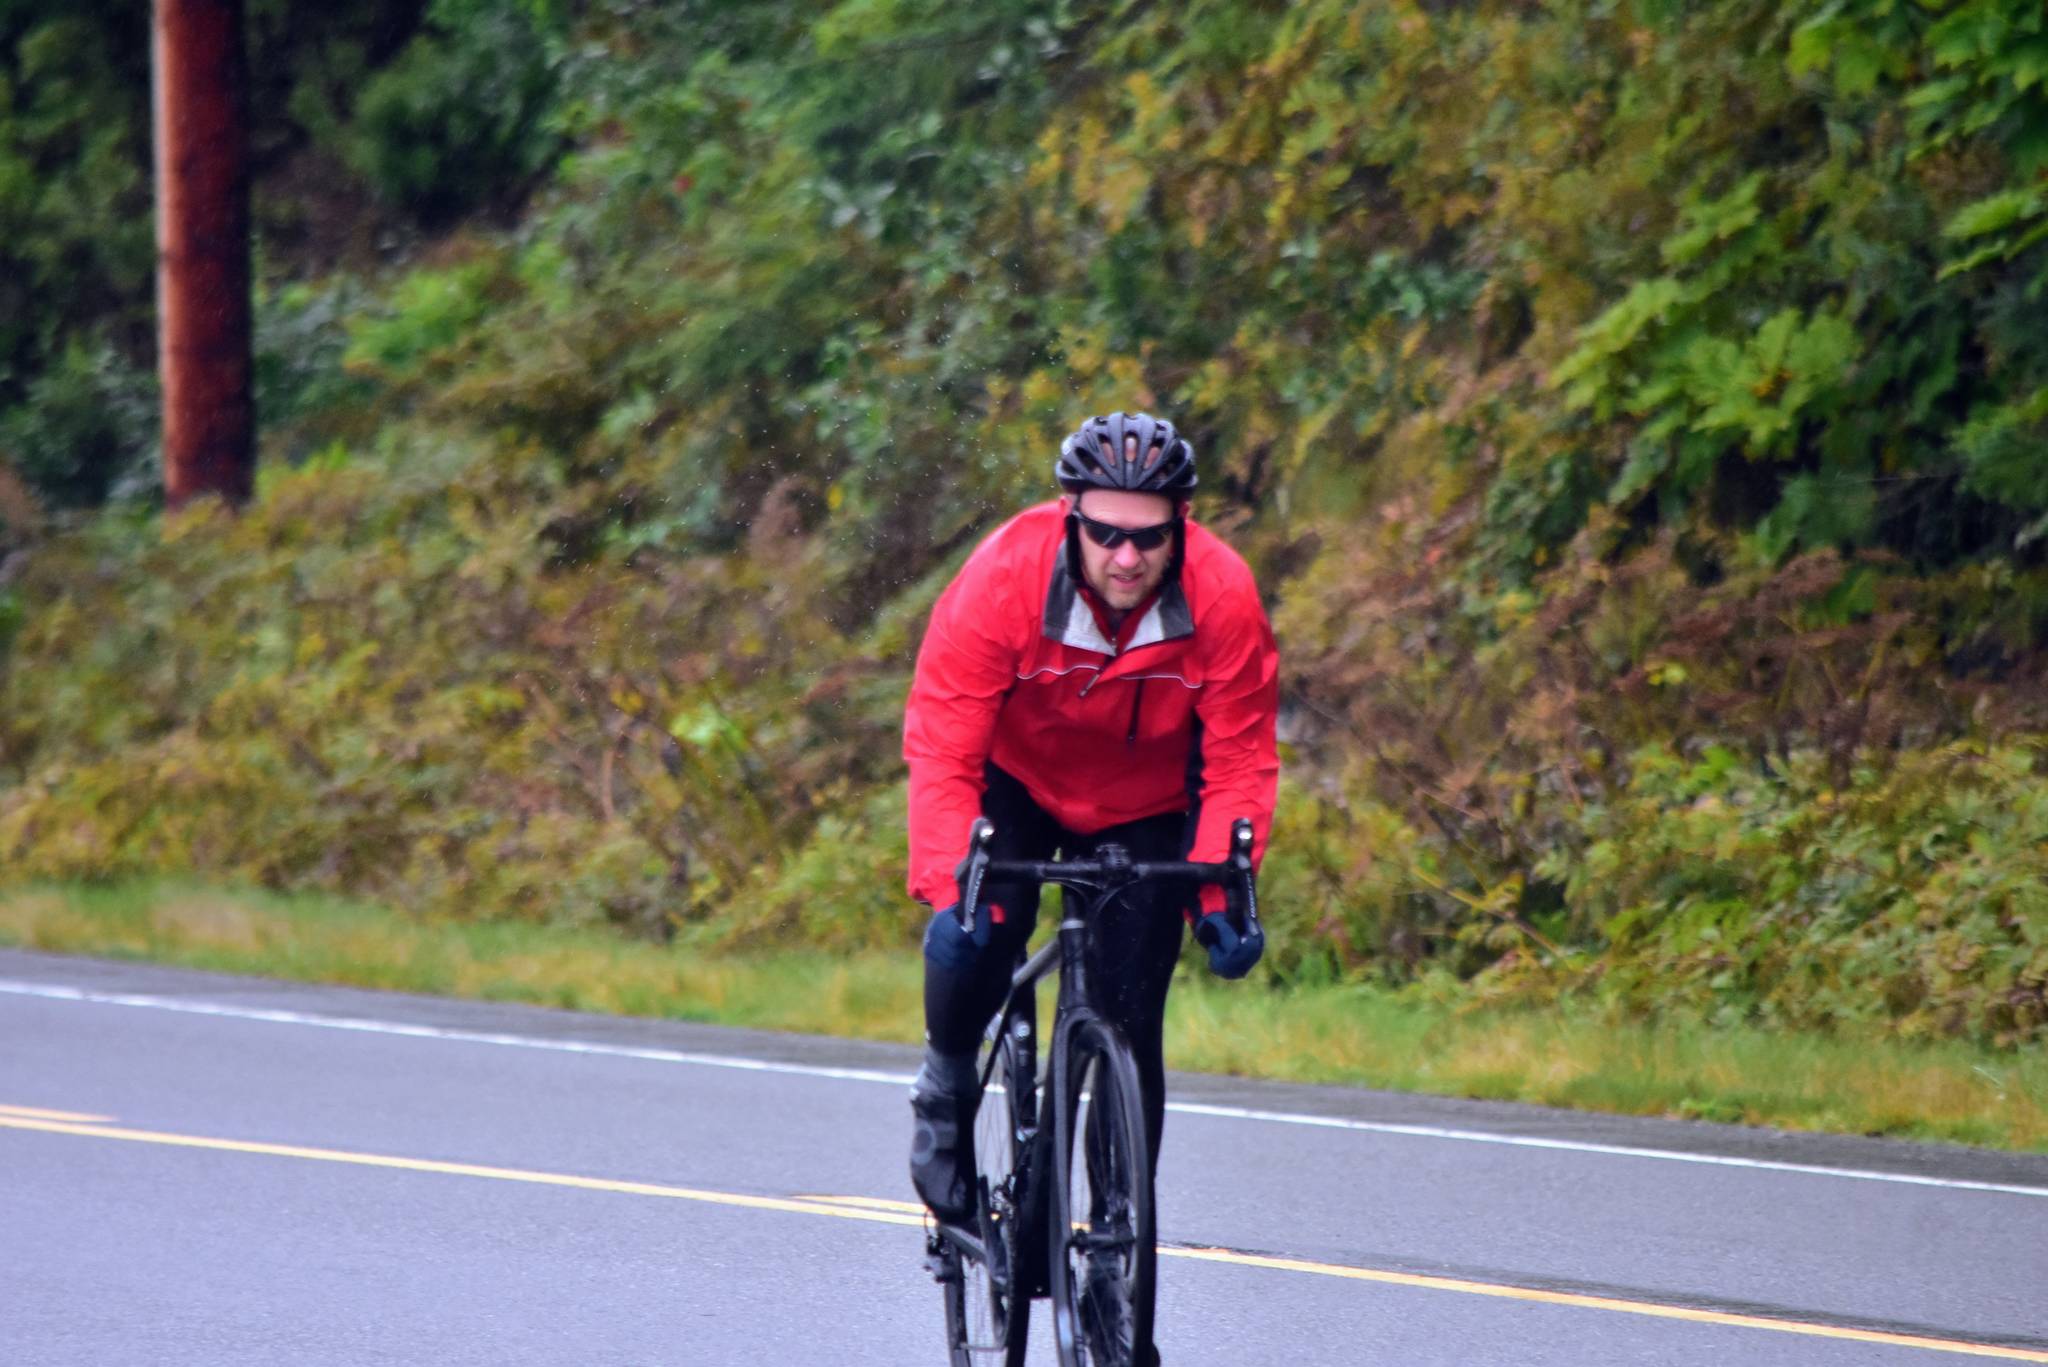 Cyclist Will Mitchell completes the first leg of the Tour of Juneau bike race on the North Douglas Highway on Friday, Aug. 14, 2020. (Peter Segall / Juneau Empire)